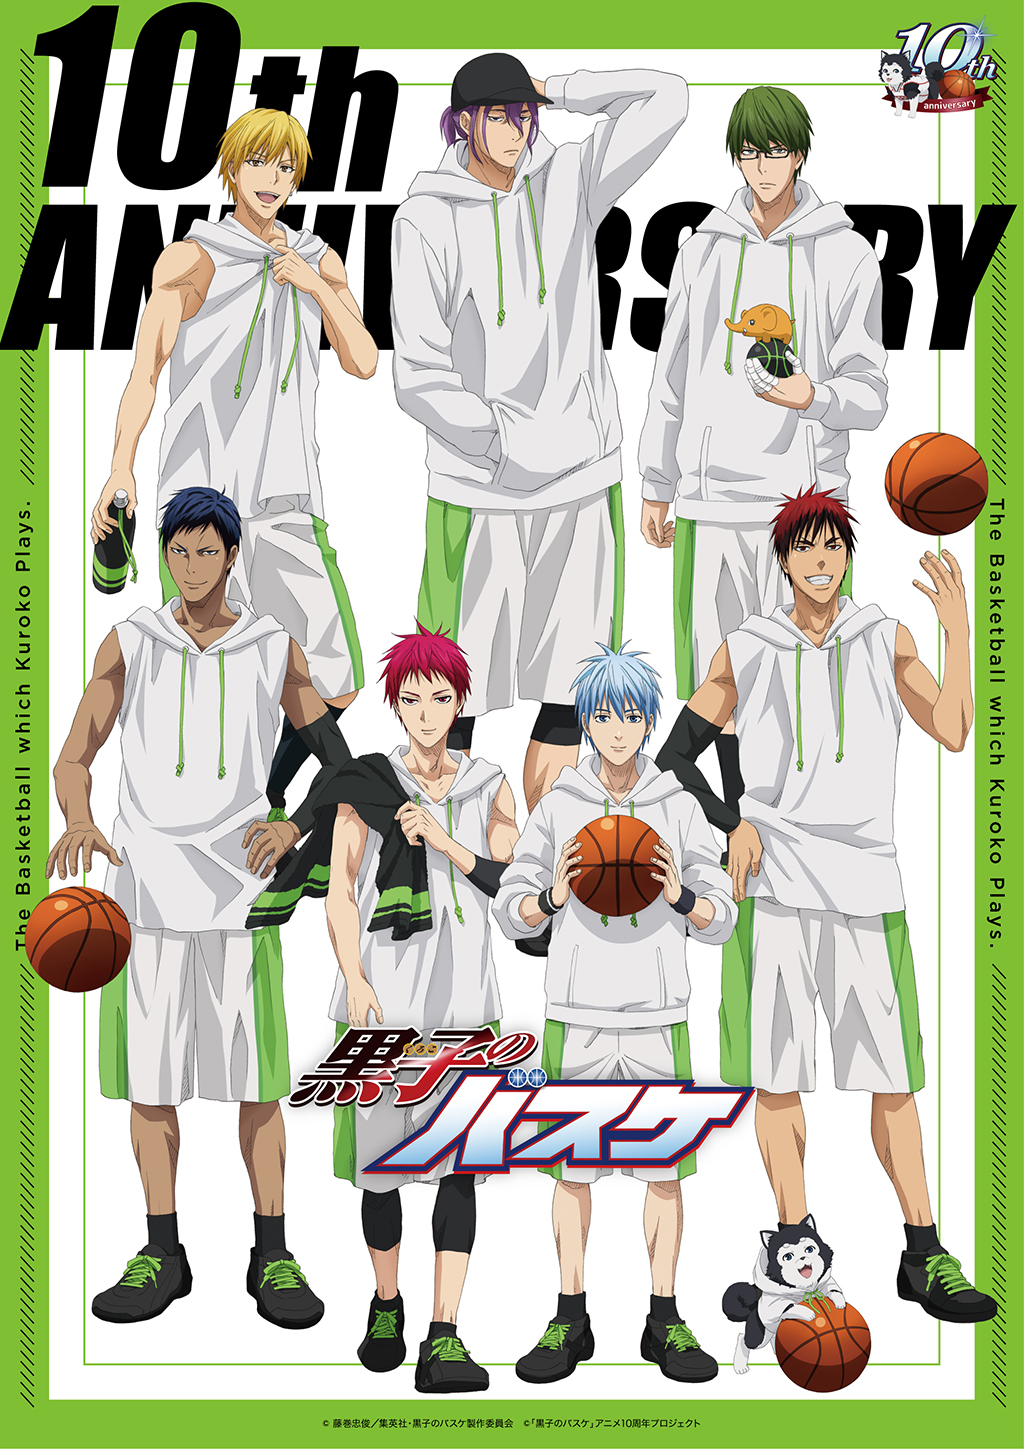 Kuroko’s Basketball “Kuro Radi” is coming back and a shop featuring Seijuro Akashi will open! People are happy to see a lot of events coming up for the 10 years anniversary project